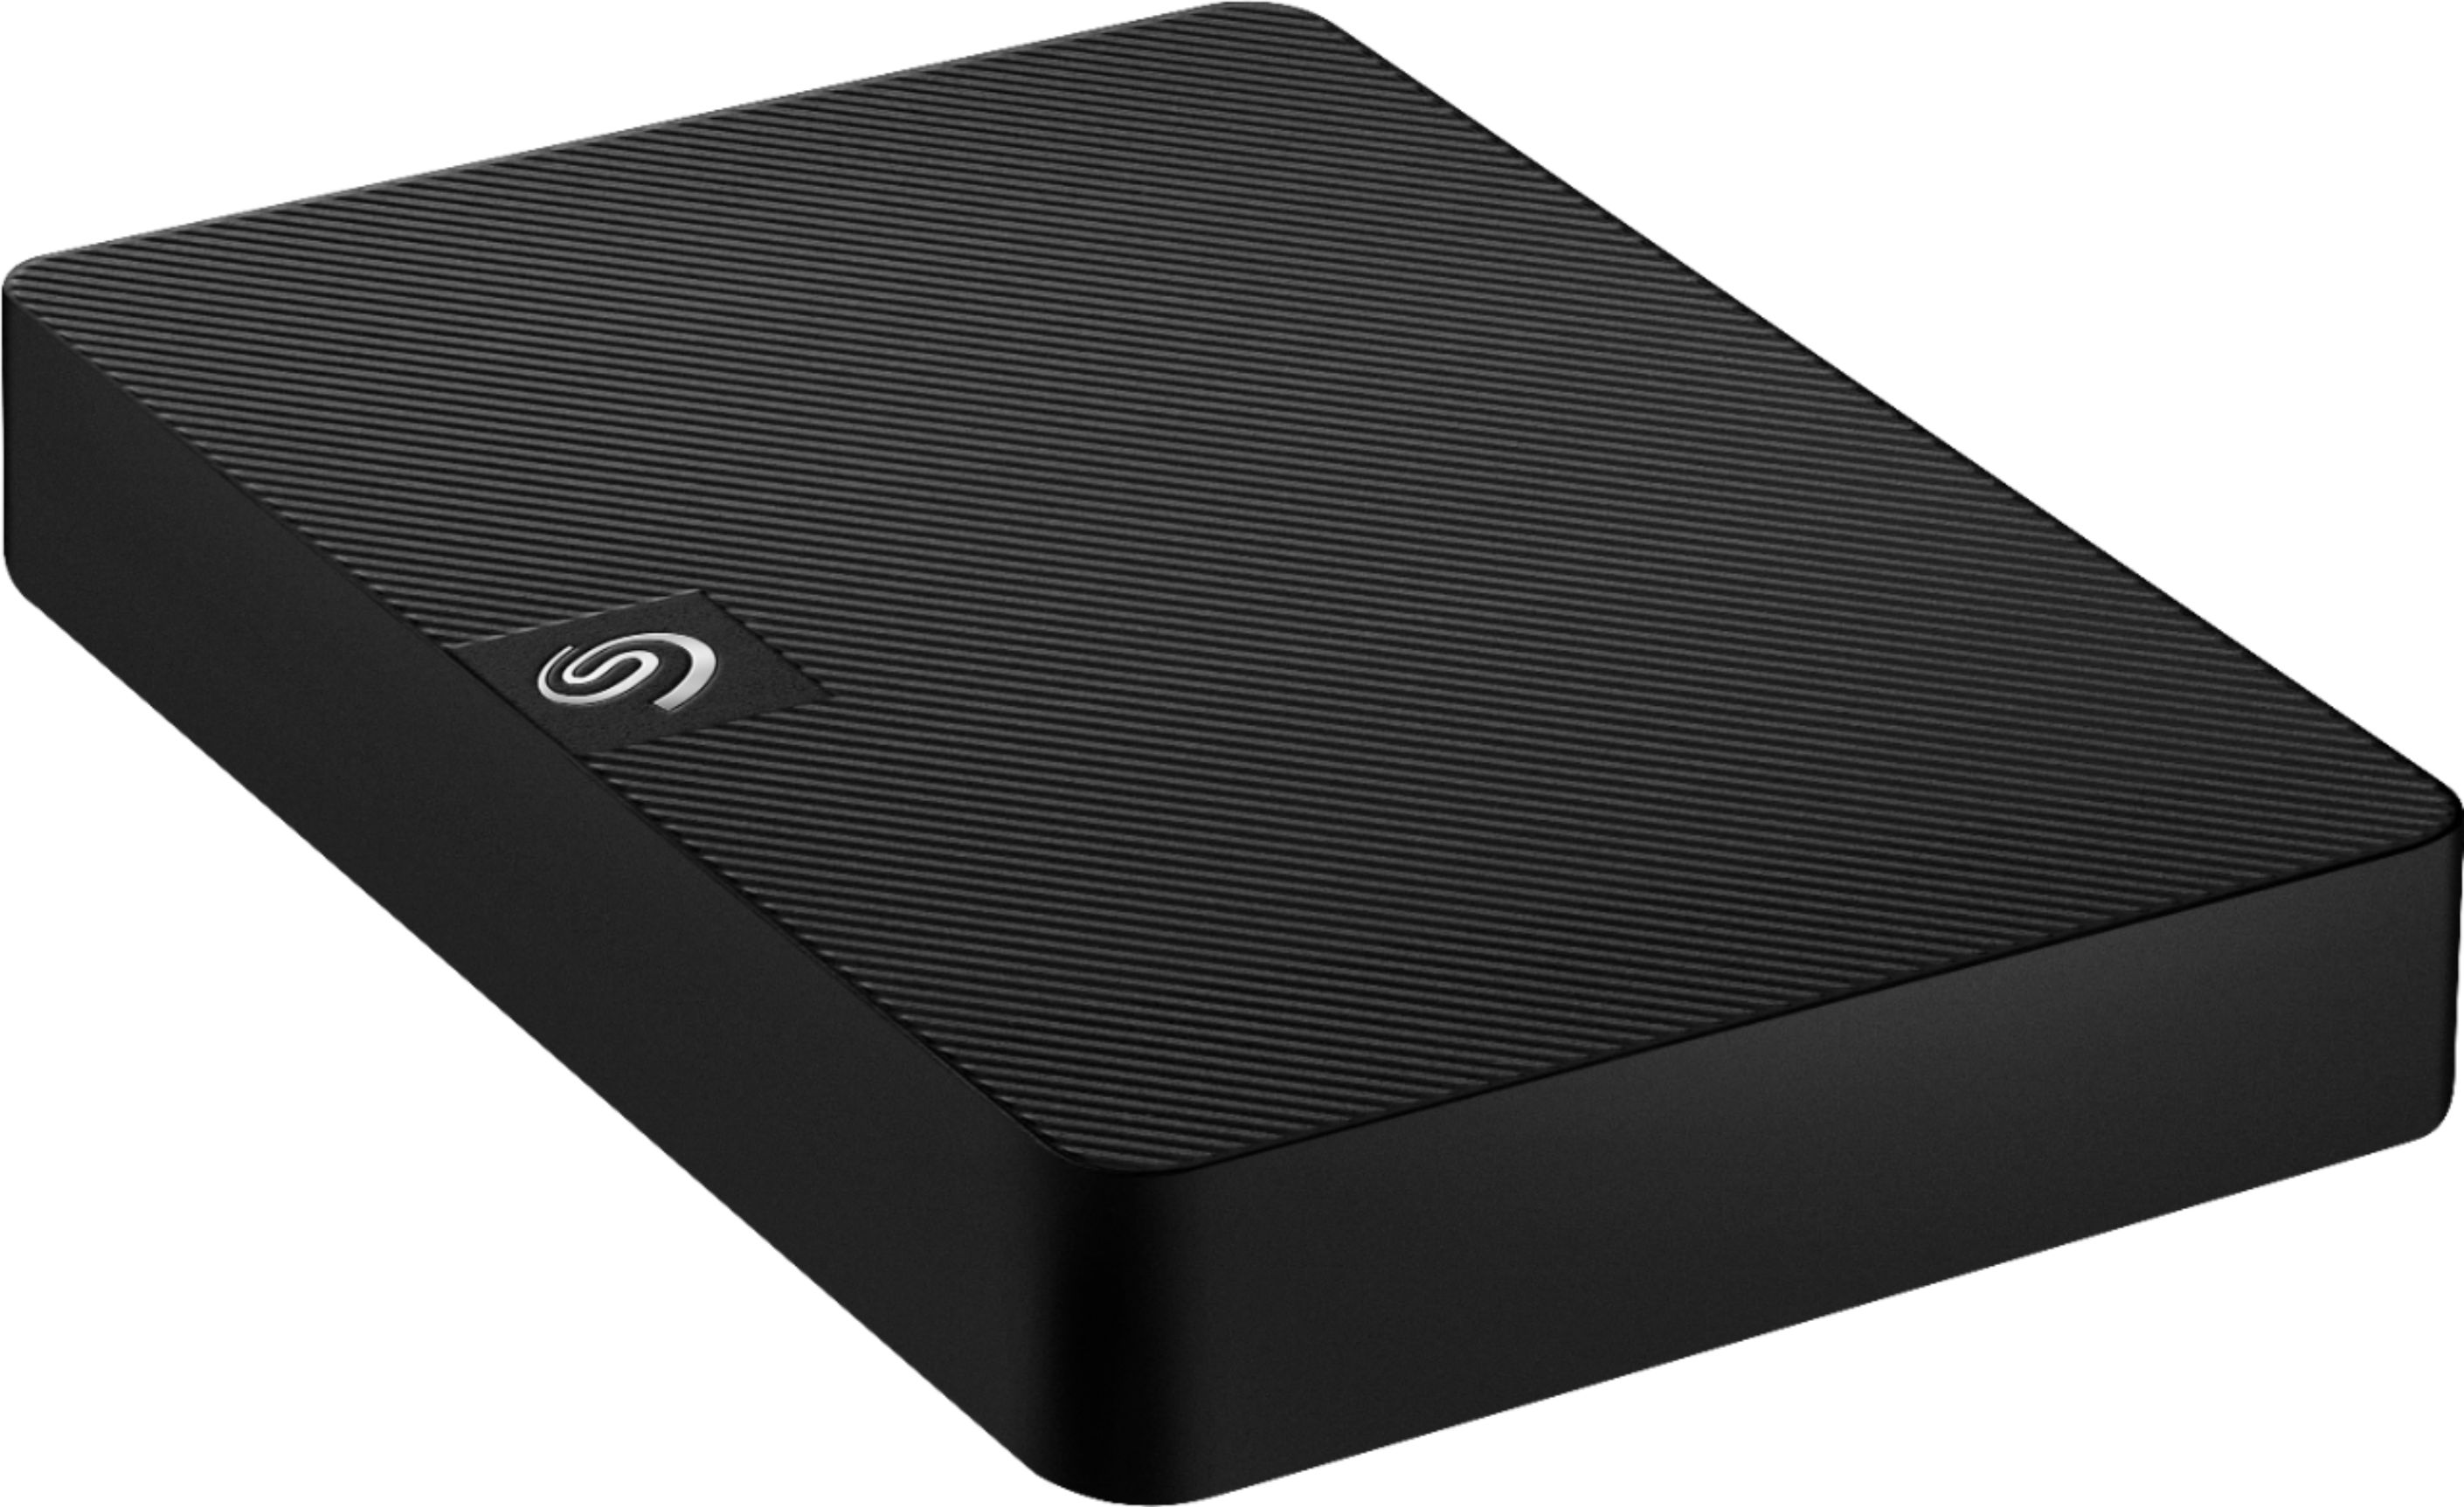 Angle View: Seagate - Expansion 4TB External USB 3.0 Portable Hard Drive with Rescue Data Recovery Services - Black